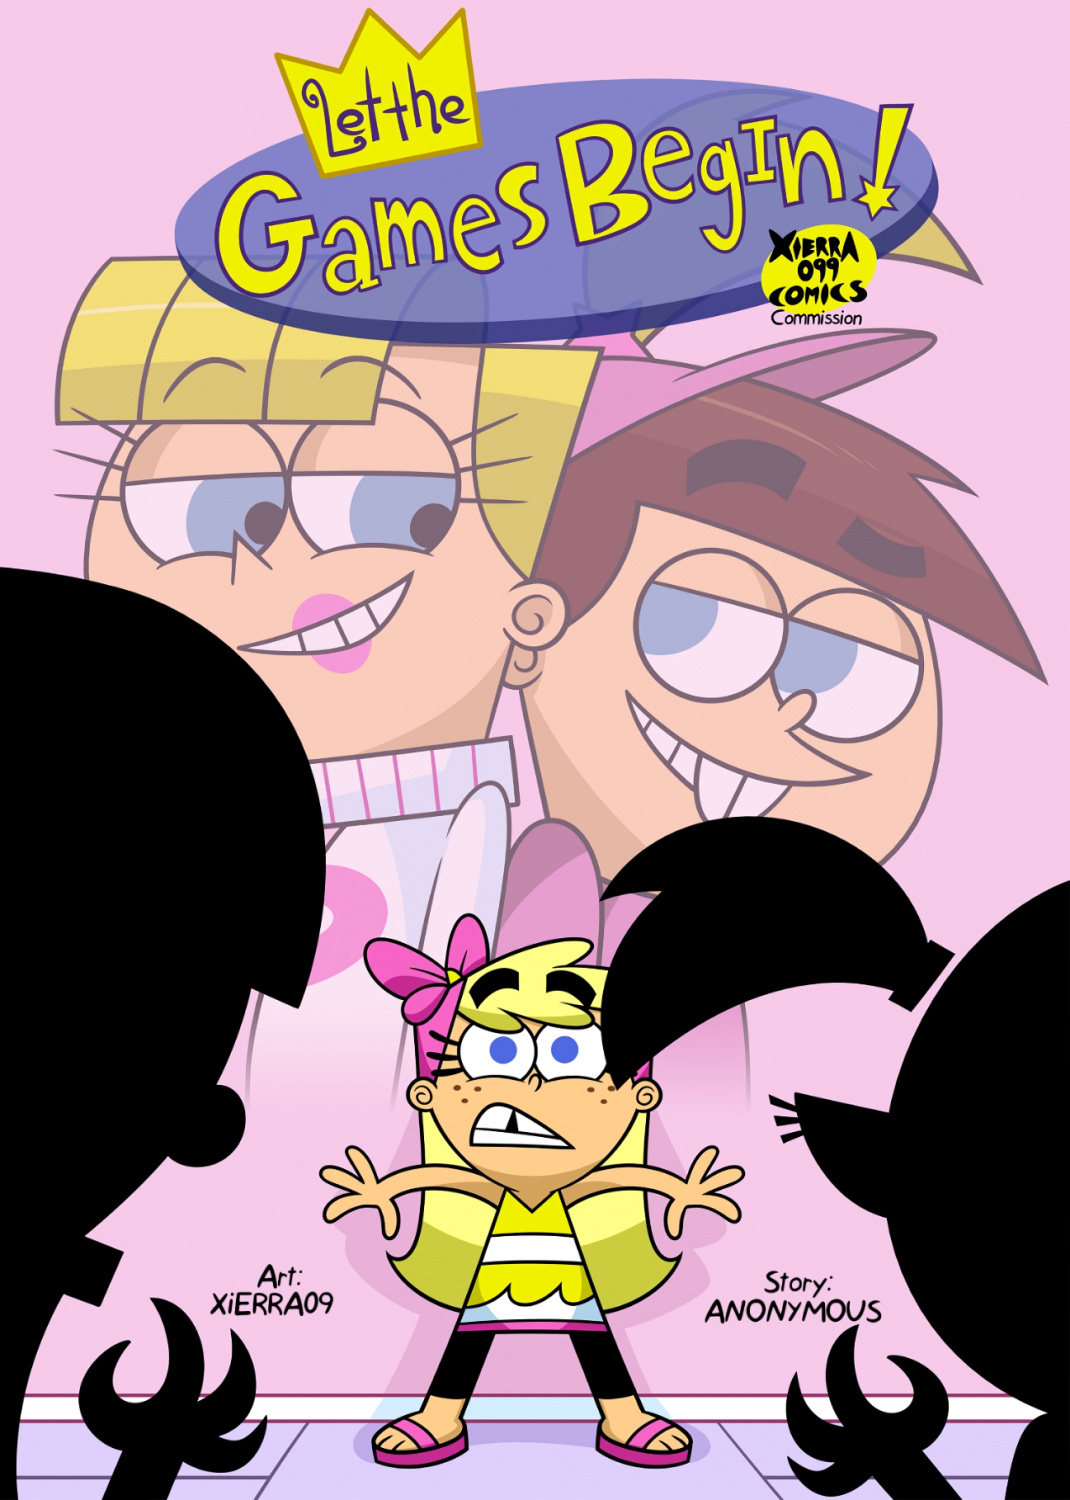 1070px x 1500px - The Fairly OddParents: Let the games begin! - Multporn Comics & Hentai manga